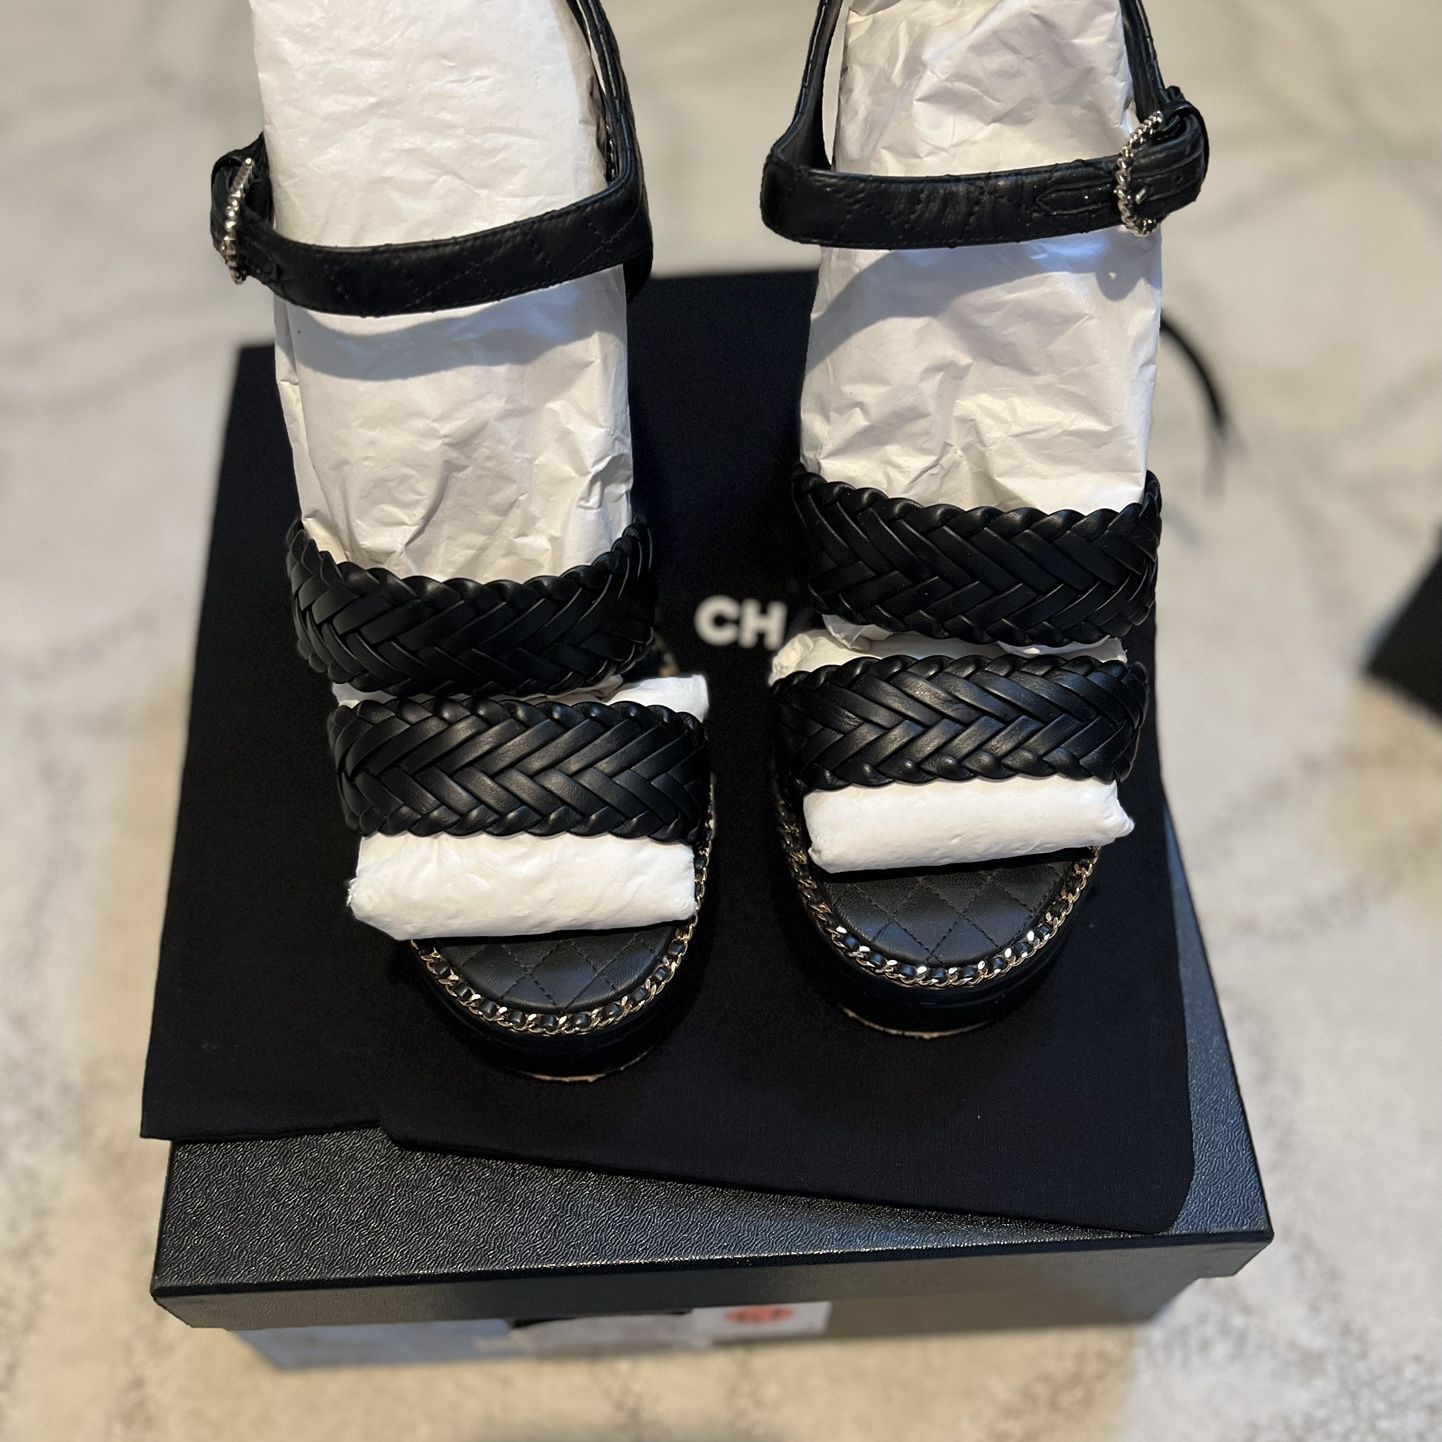 Chanel Wedges for Sale in West Covina, CA - OfferUp